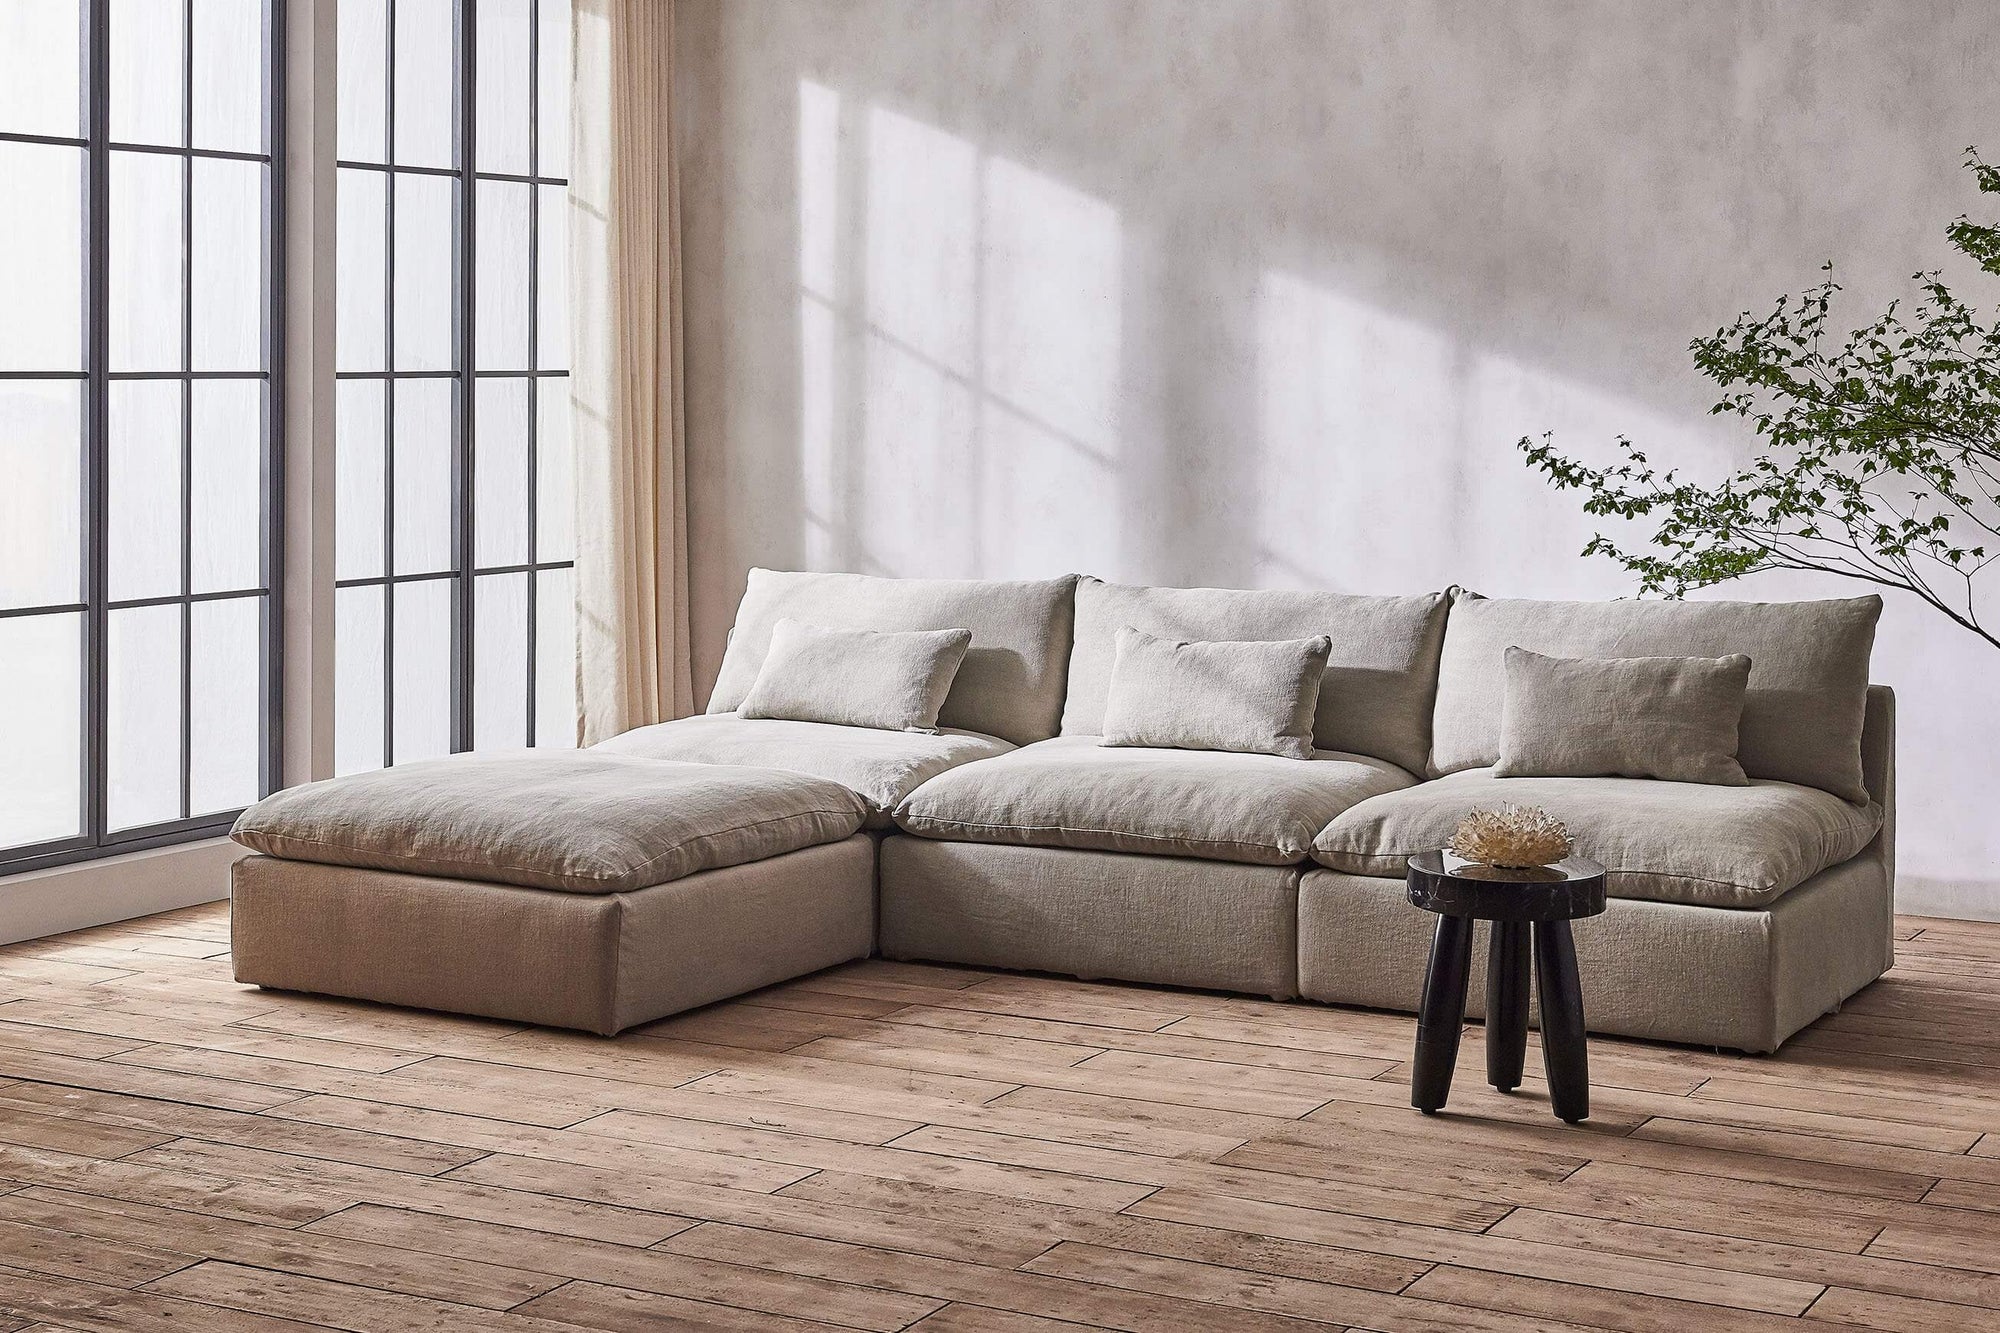 Aria 4-piece Chaise Sectional Sofa in Jasmine Rice, a light warm greige Medium Weight Linen, placed in a sunlit room with a large windown and a black stone stool